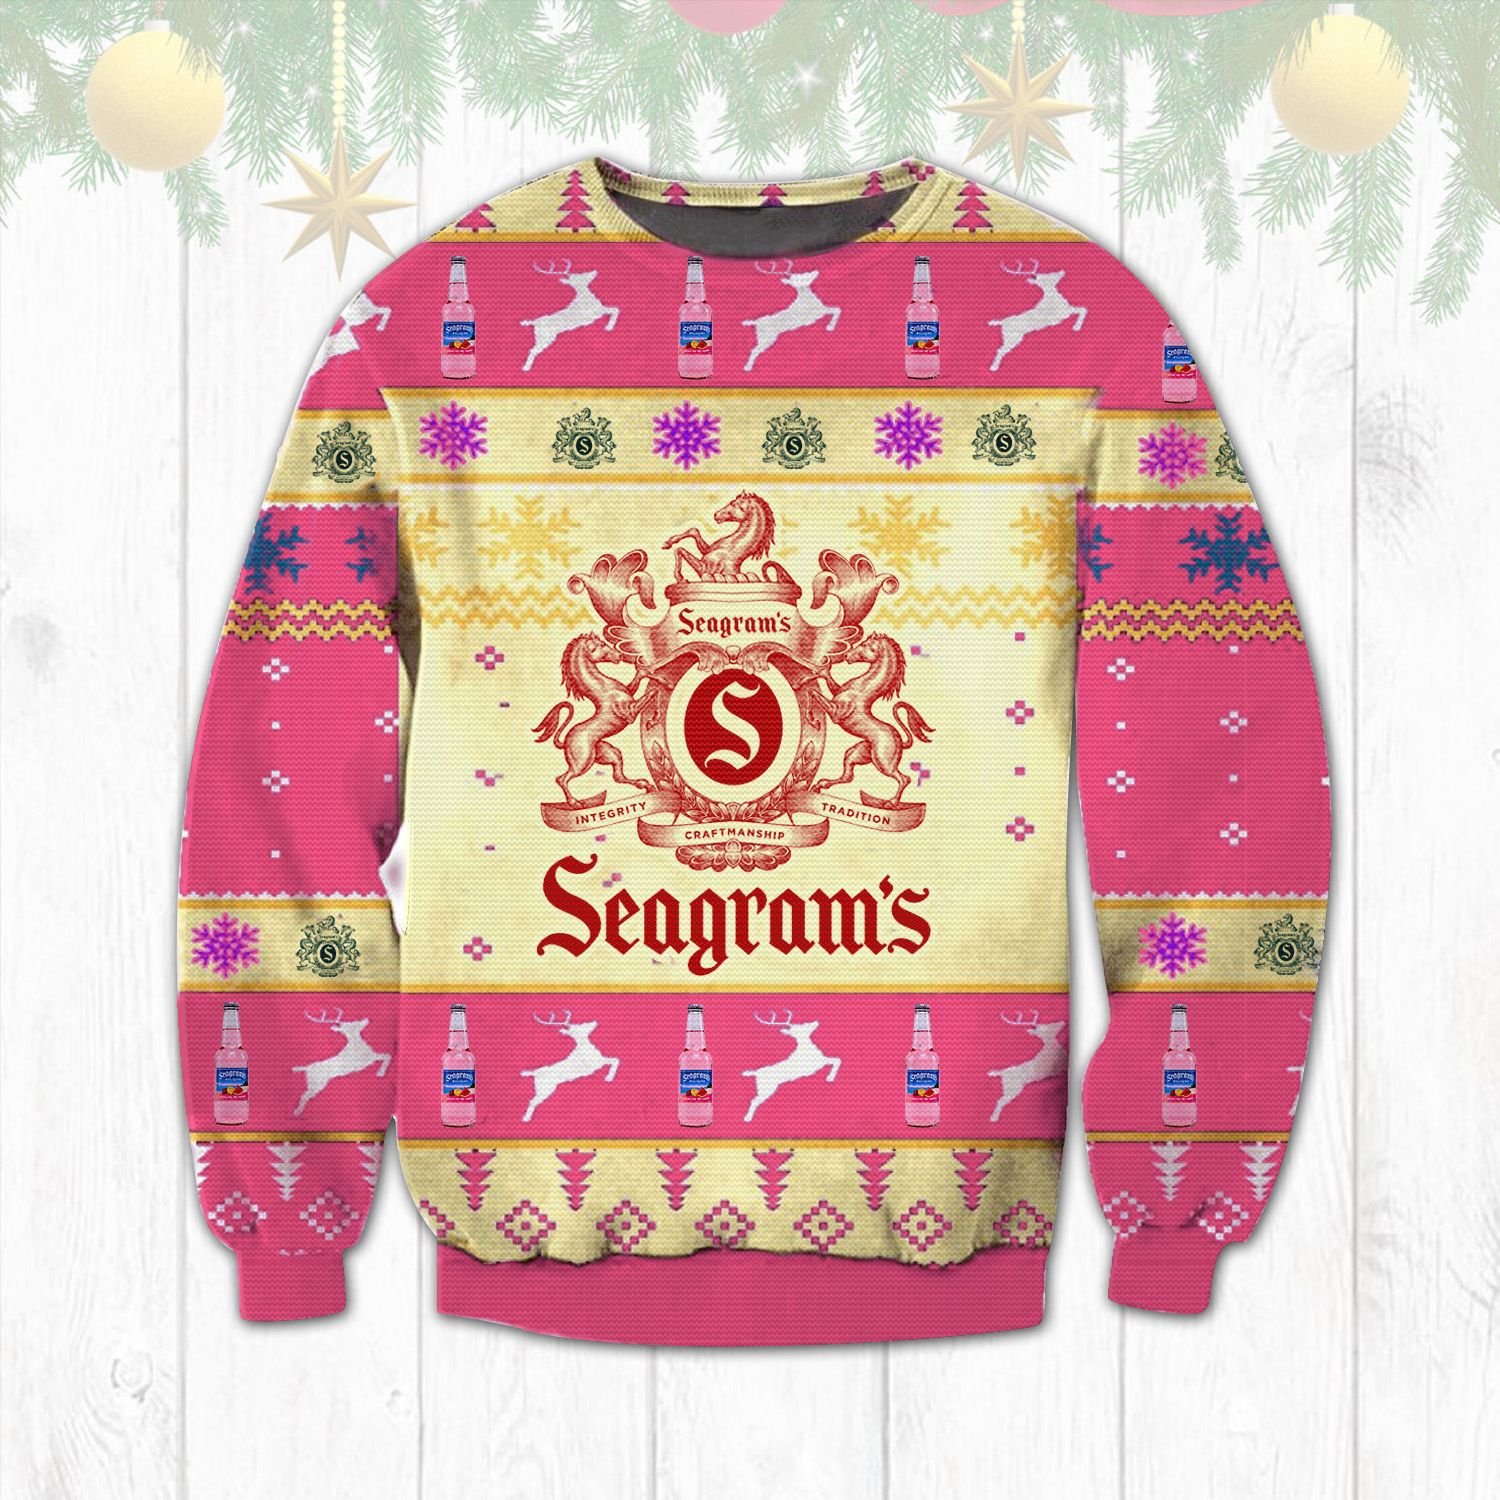 Seagram's Gin Christmas sweater 1